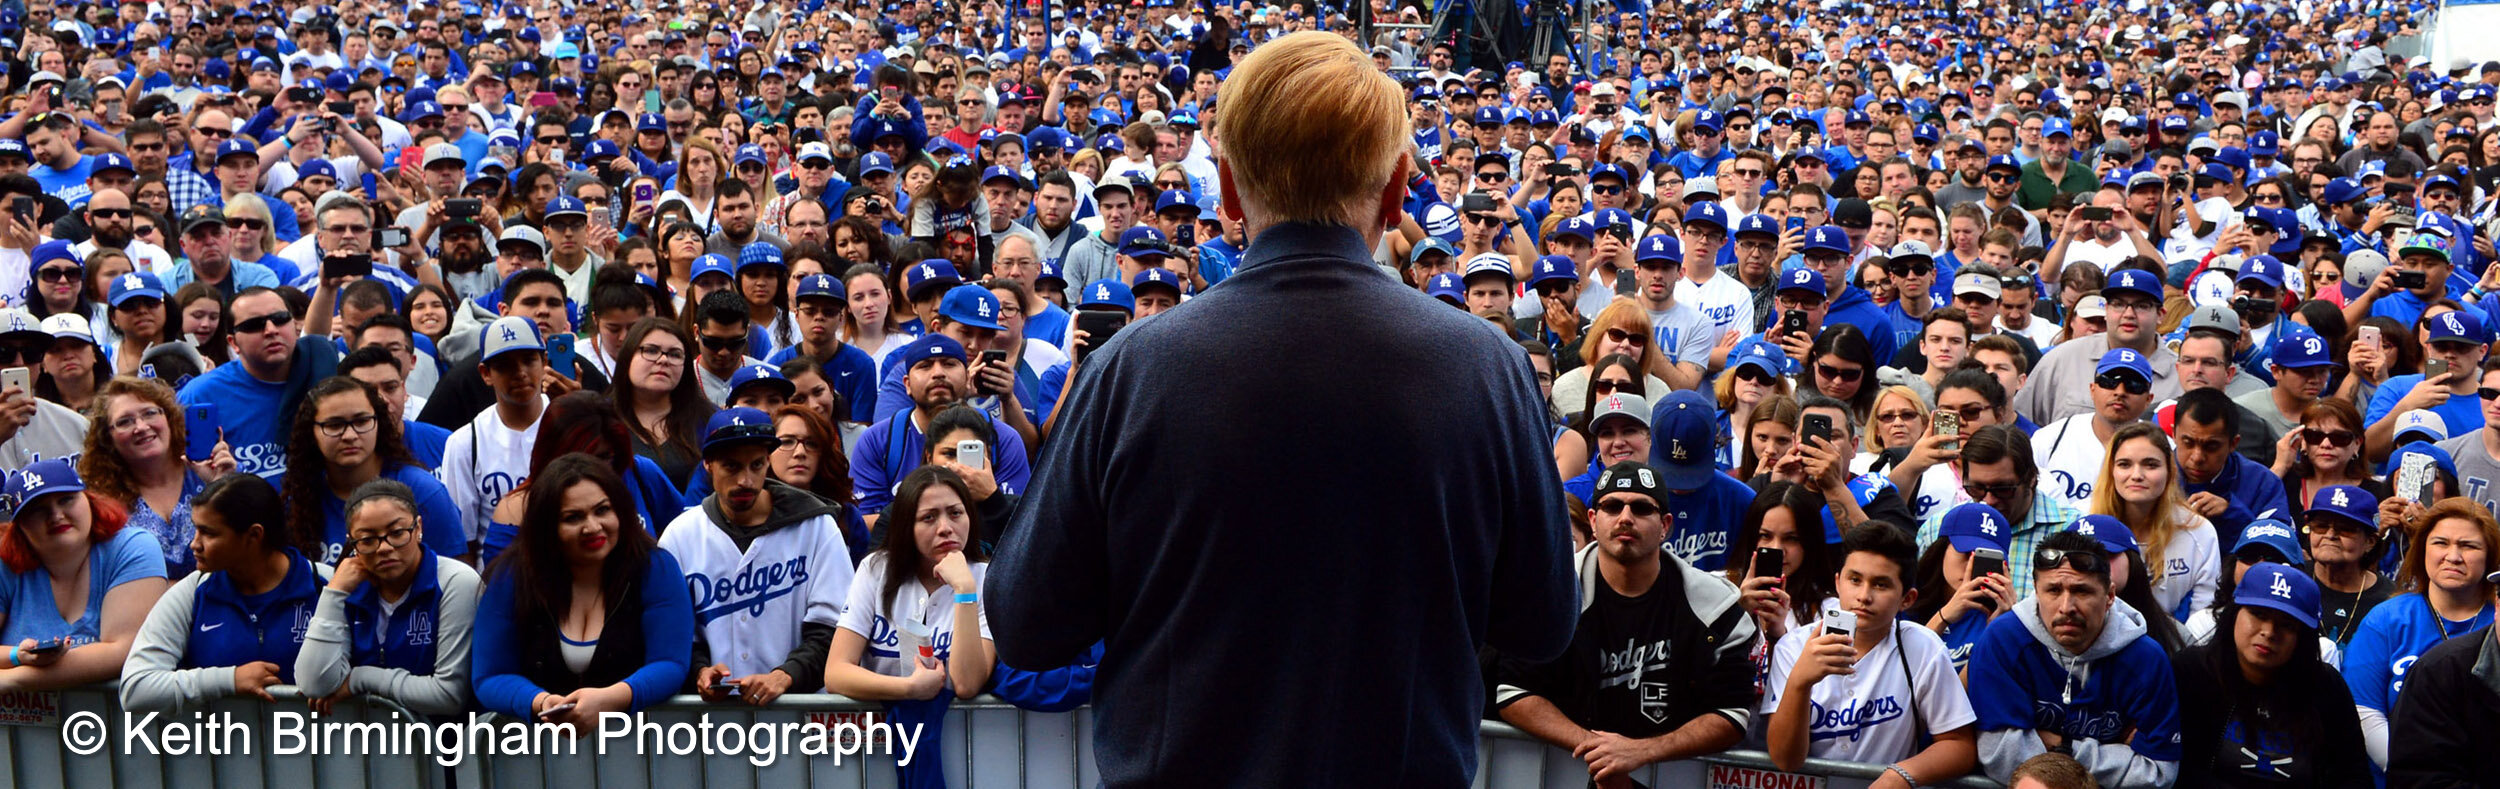  Hall of Fame broadcaster Vin Scully looks upon thousands as he tell a story during the fourth annual offseason FanFest on Saturday, Jan. 30, 2016 in Los Angeles. (Photo by Keith Birmingham, Pasadena Star-News/ SCNG) 